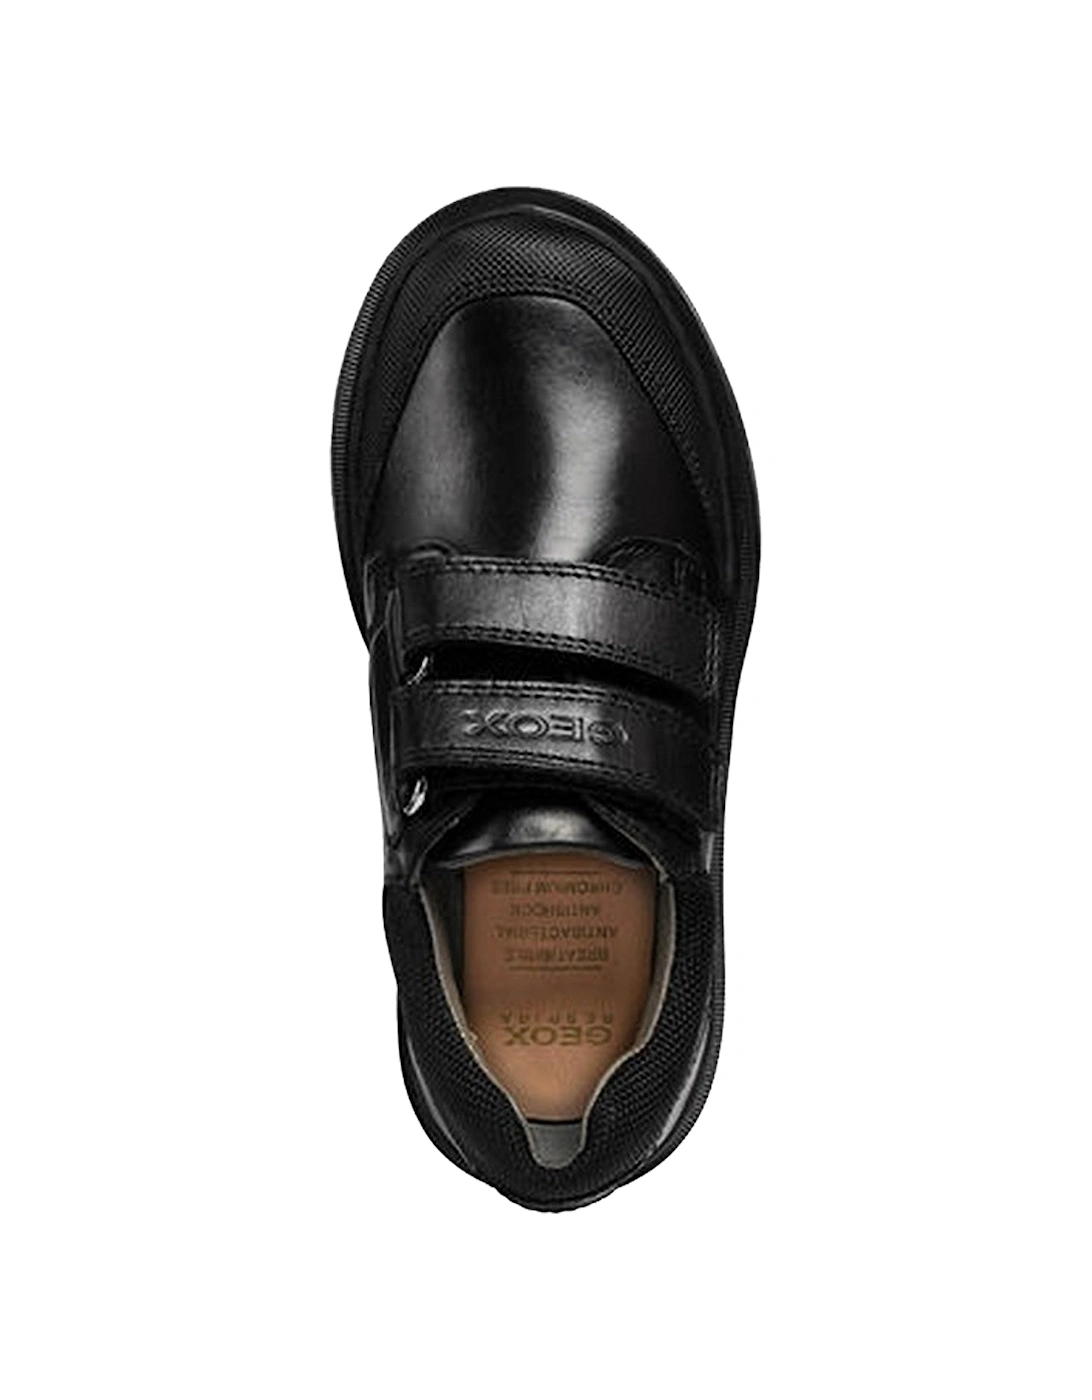 Boys Leather Riddock Touch Fastening Shoe